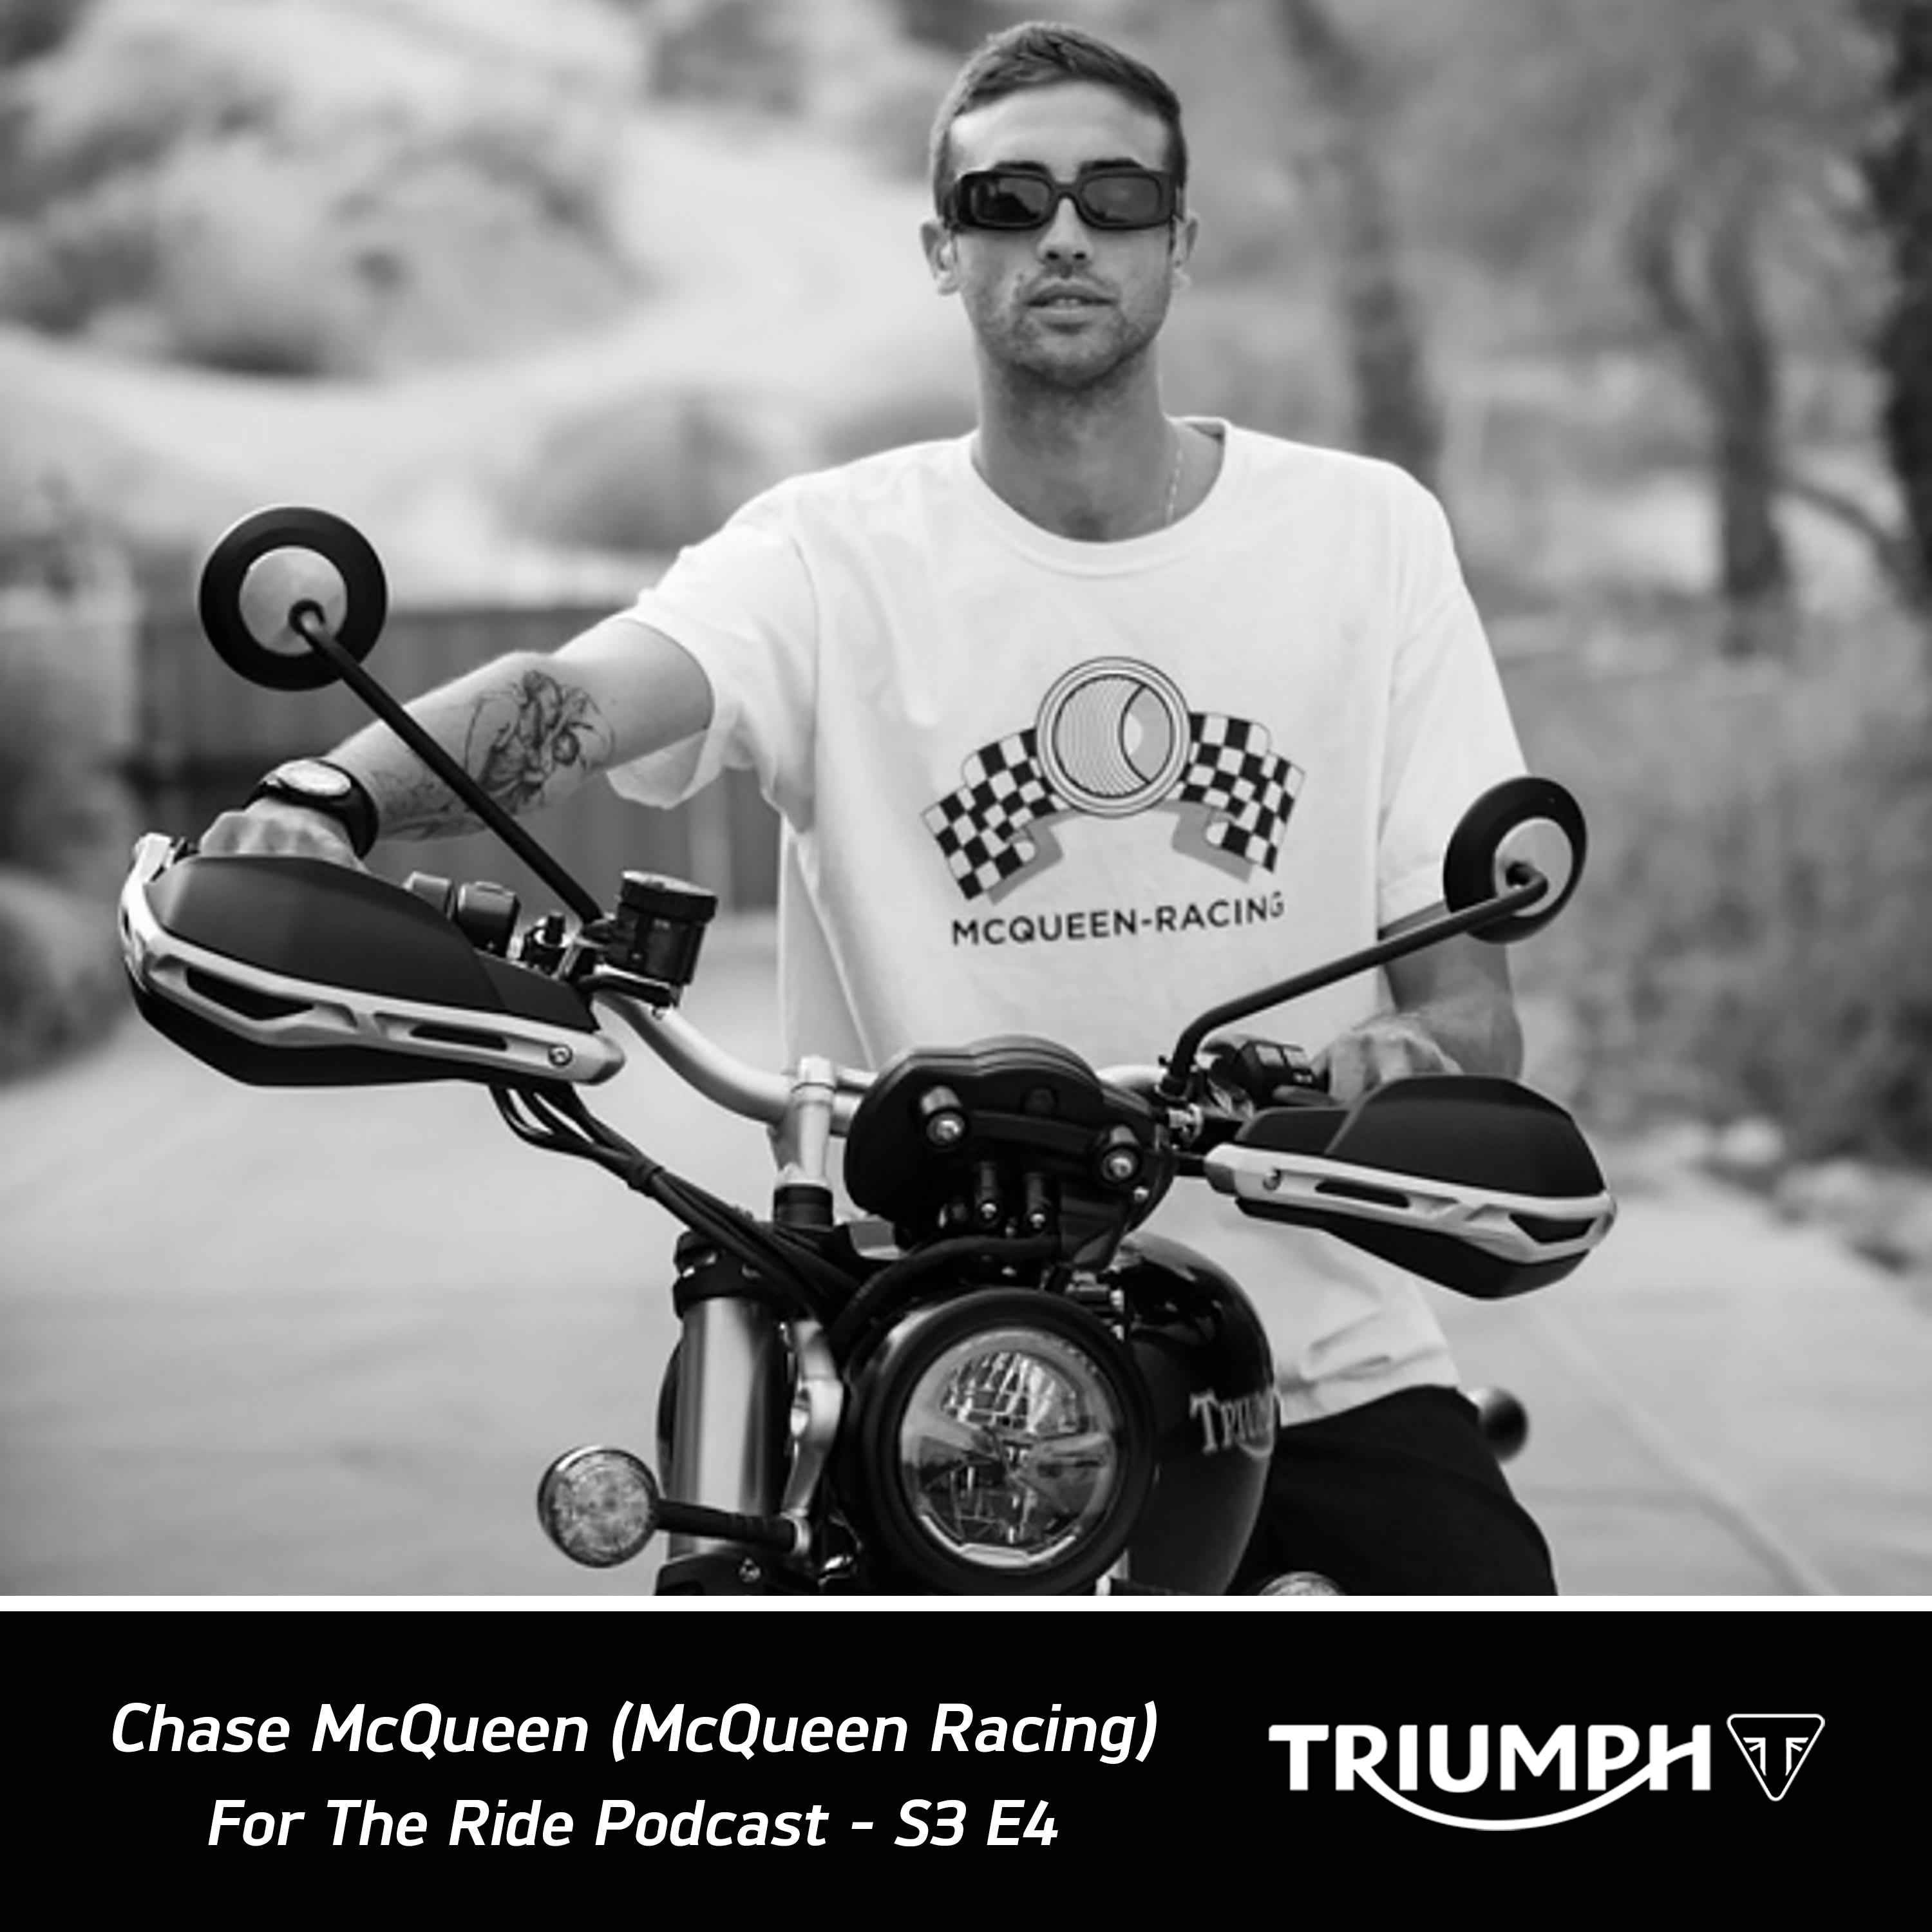 Chase McQueen